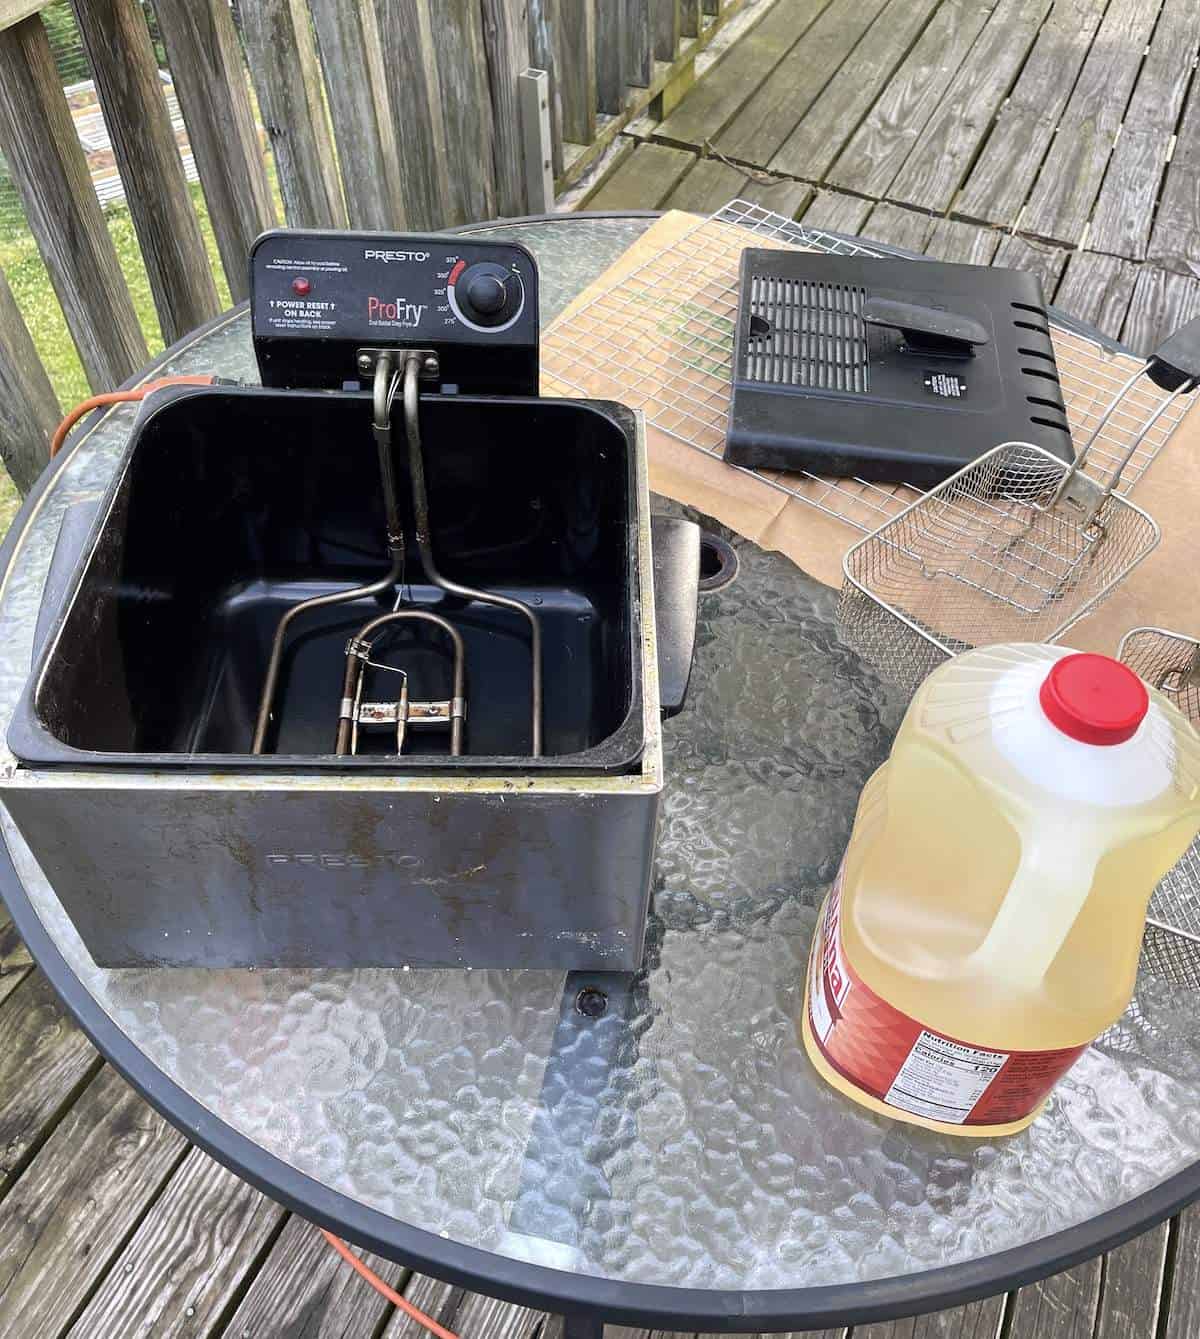 A deep fryer, peanut oil, and fryer baskets warming up to make fried chicken tenders.